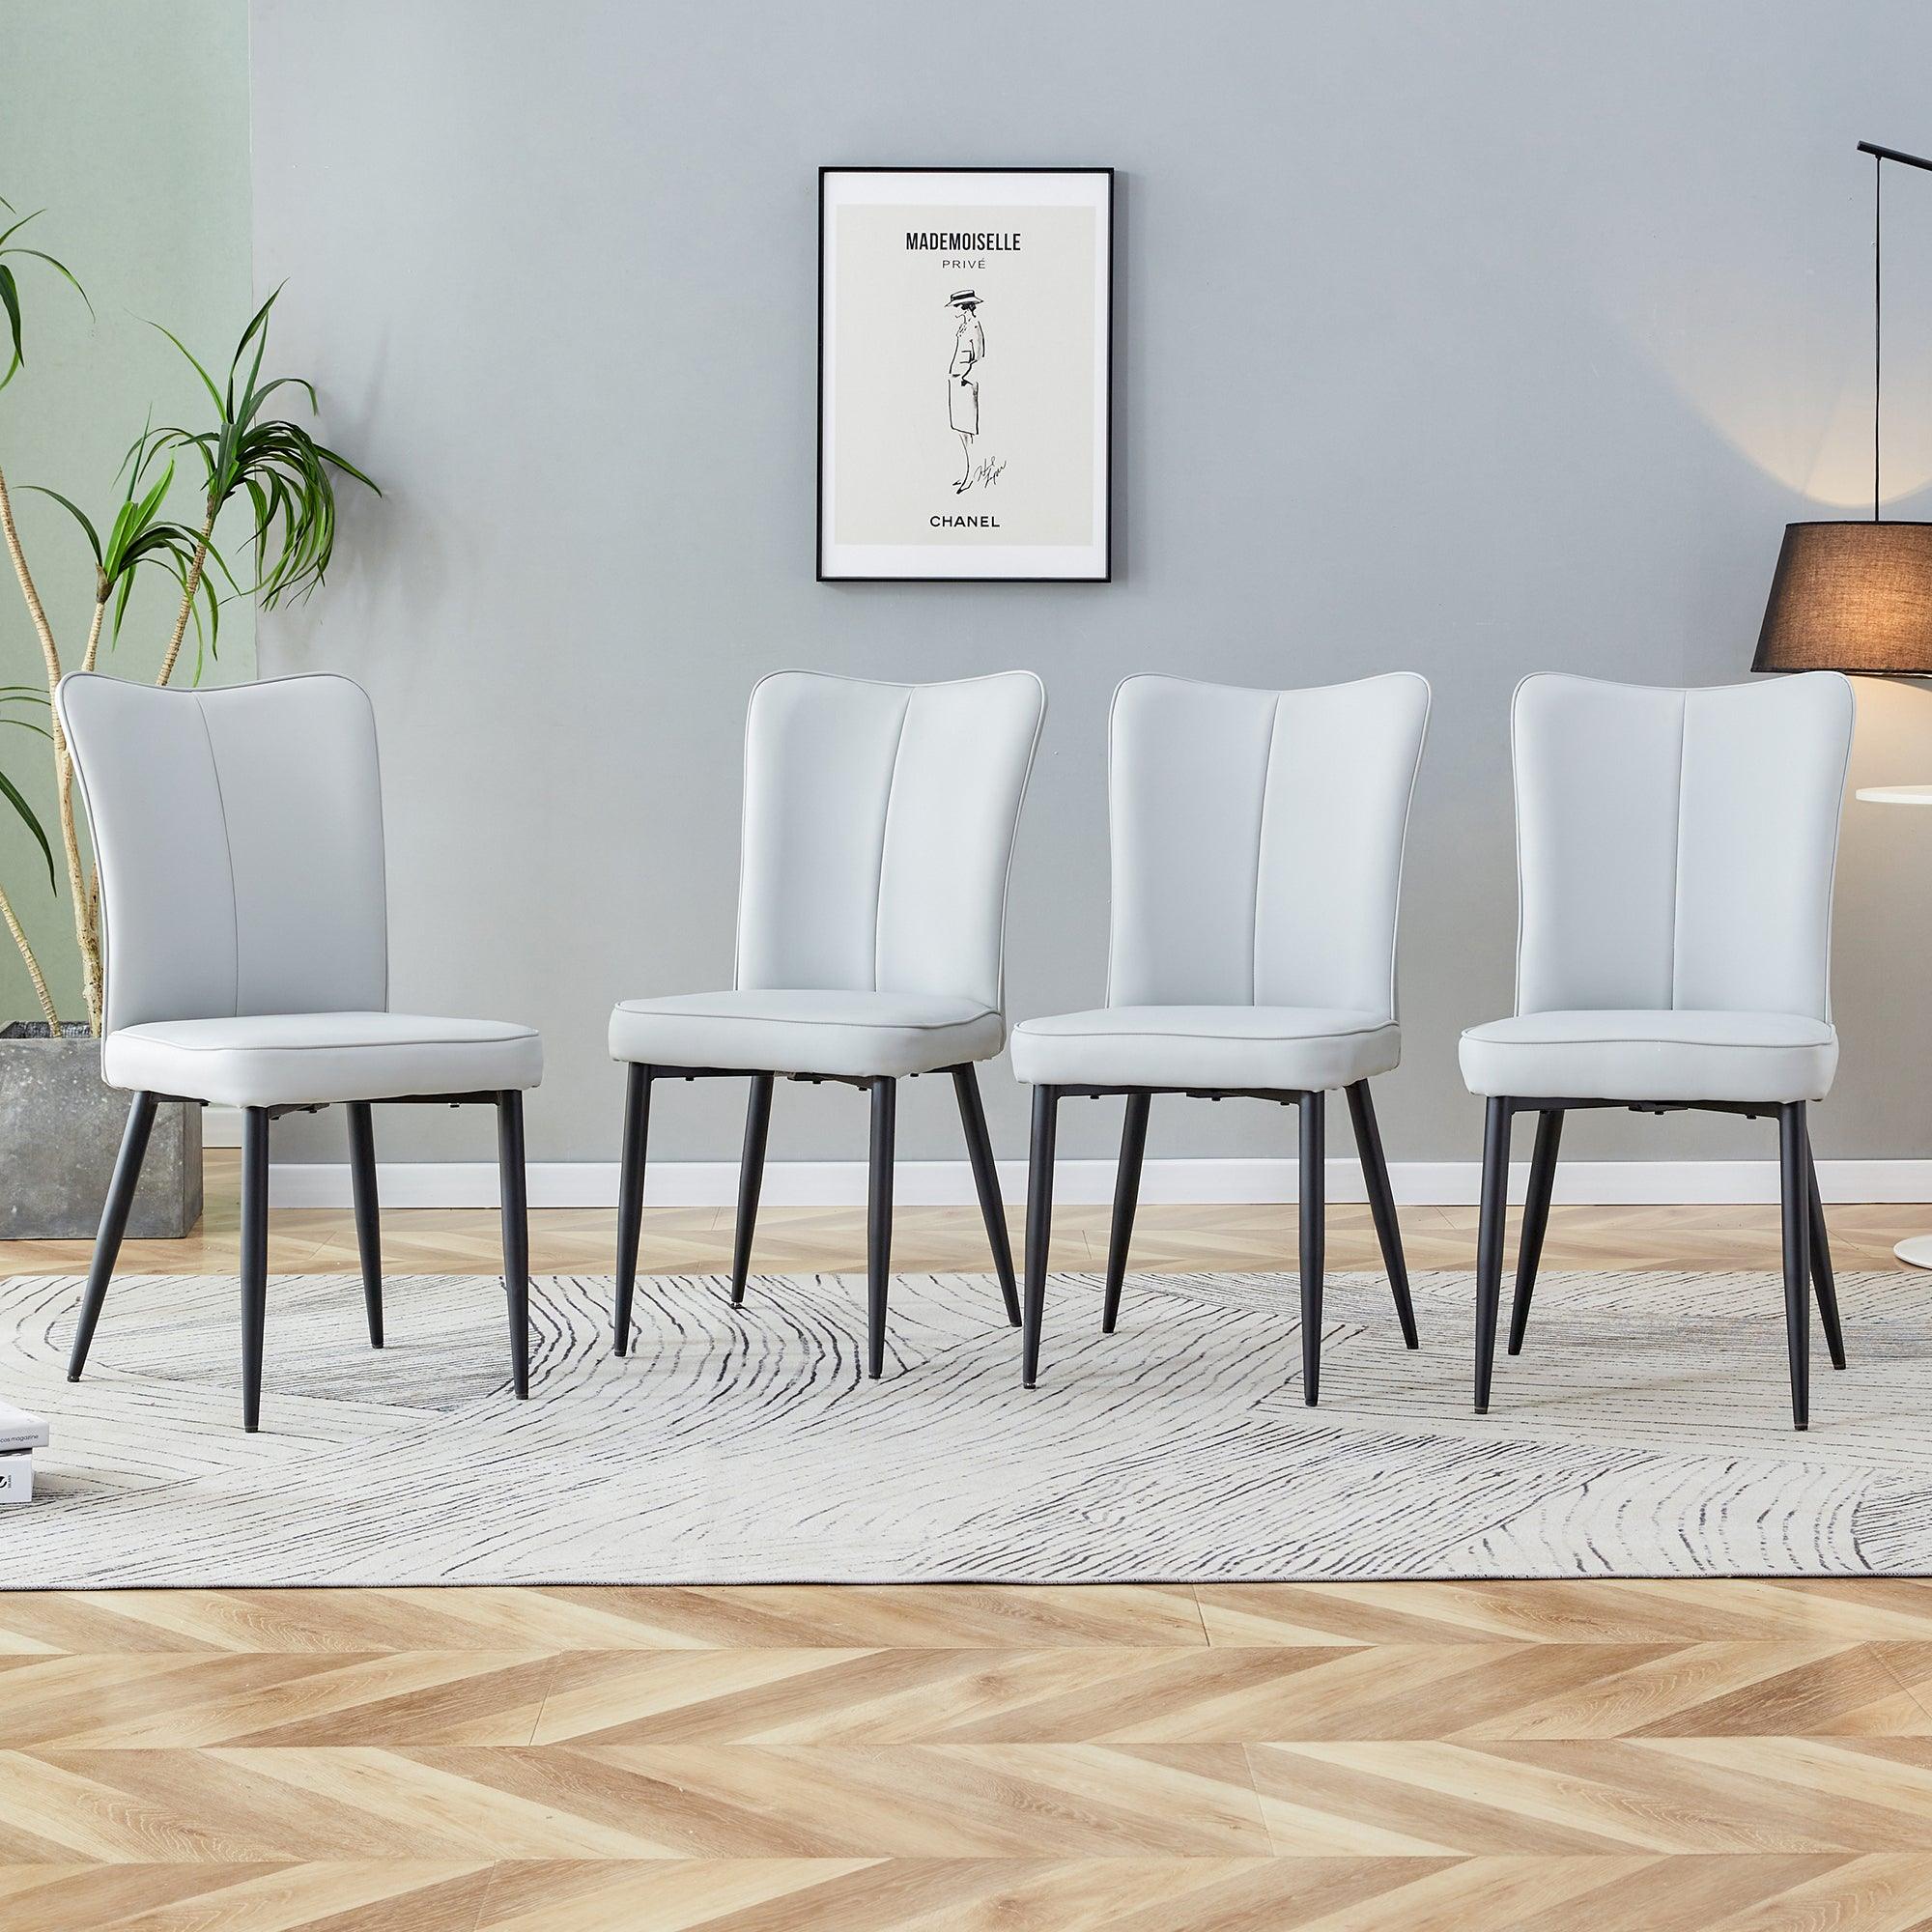 🆓🚛 Modern Minimalist Dining Chairs & Office Chairs 4-Piece Set Of Light Gray Pu Seats With Black Metal Legs Suitable for Restaurants, Living Rooms, & Offices.